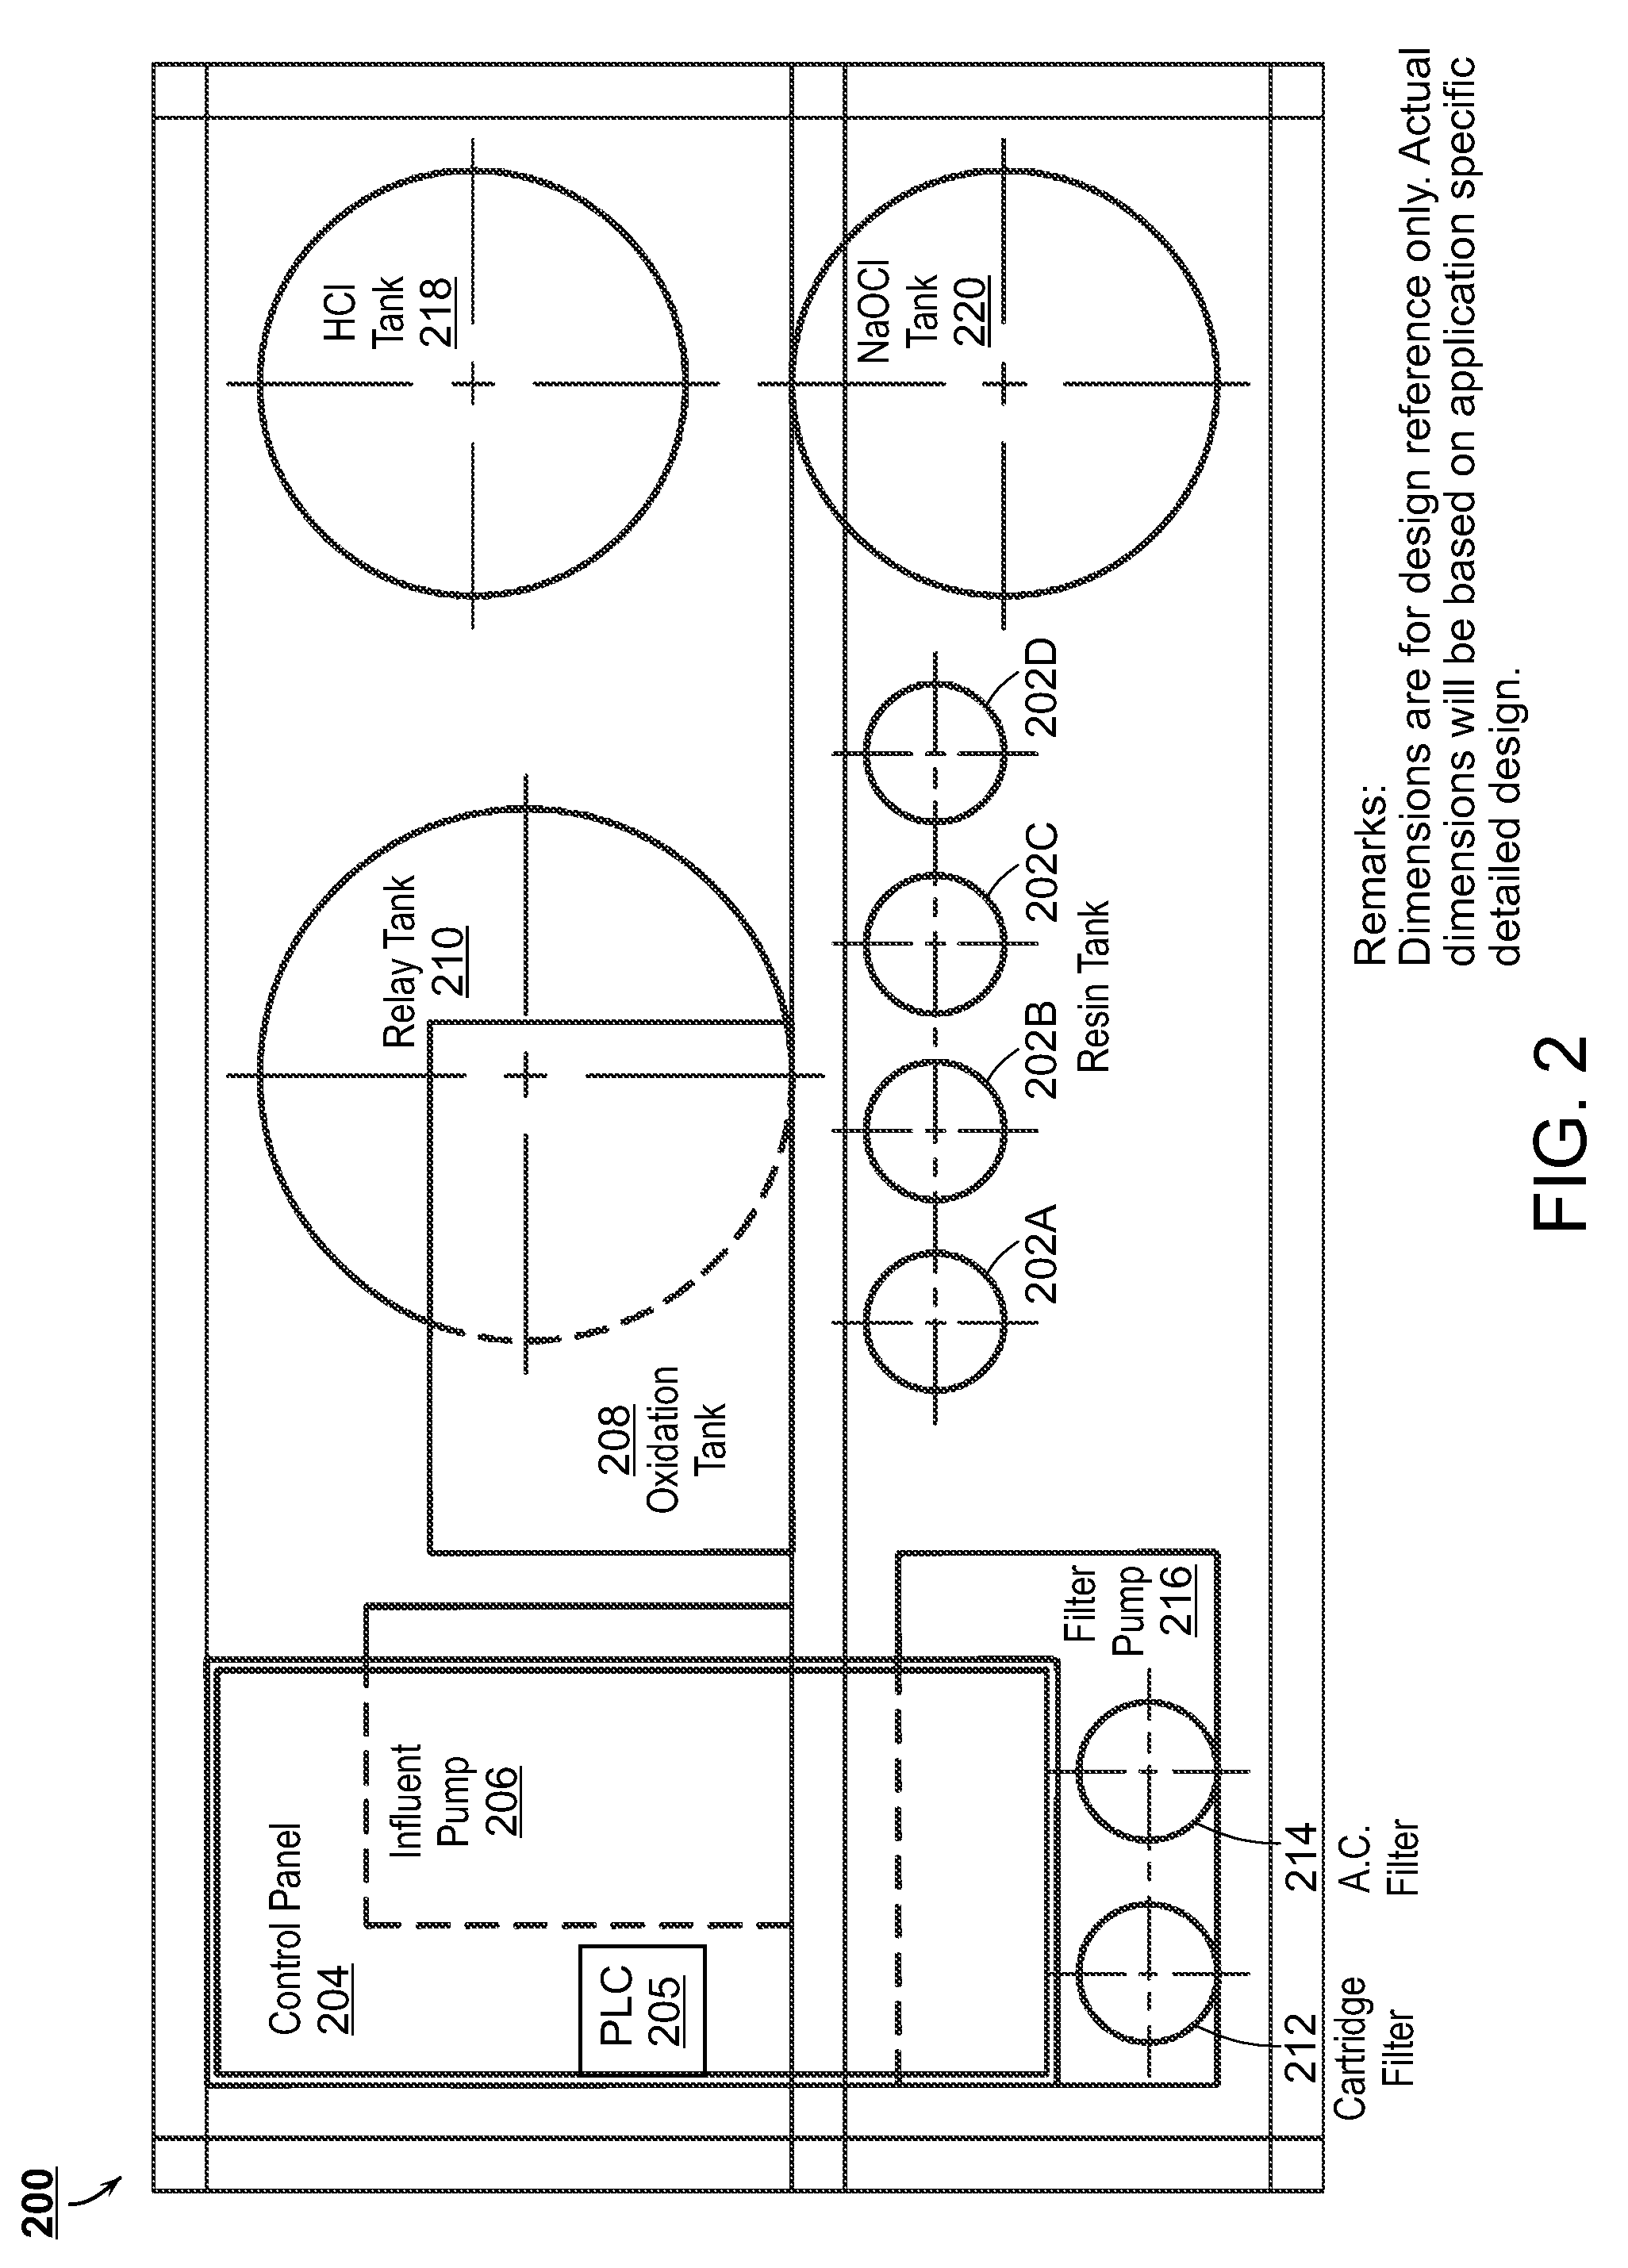 System and method for wastewater treatment